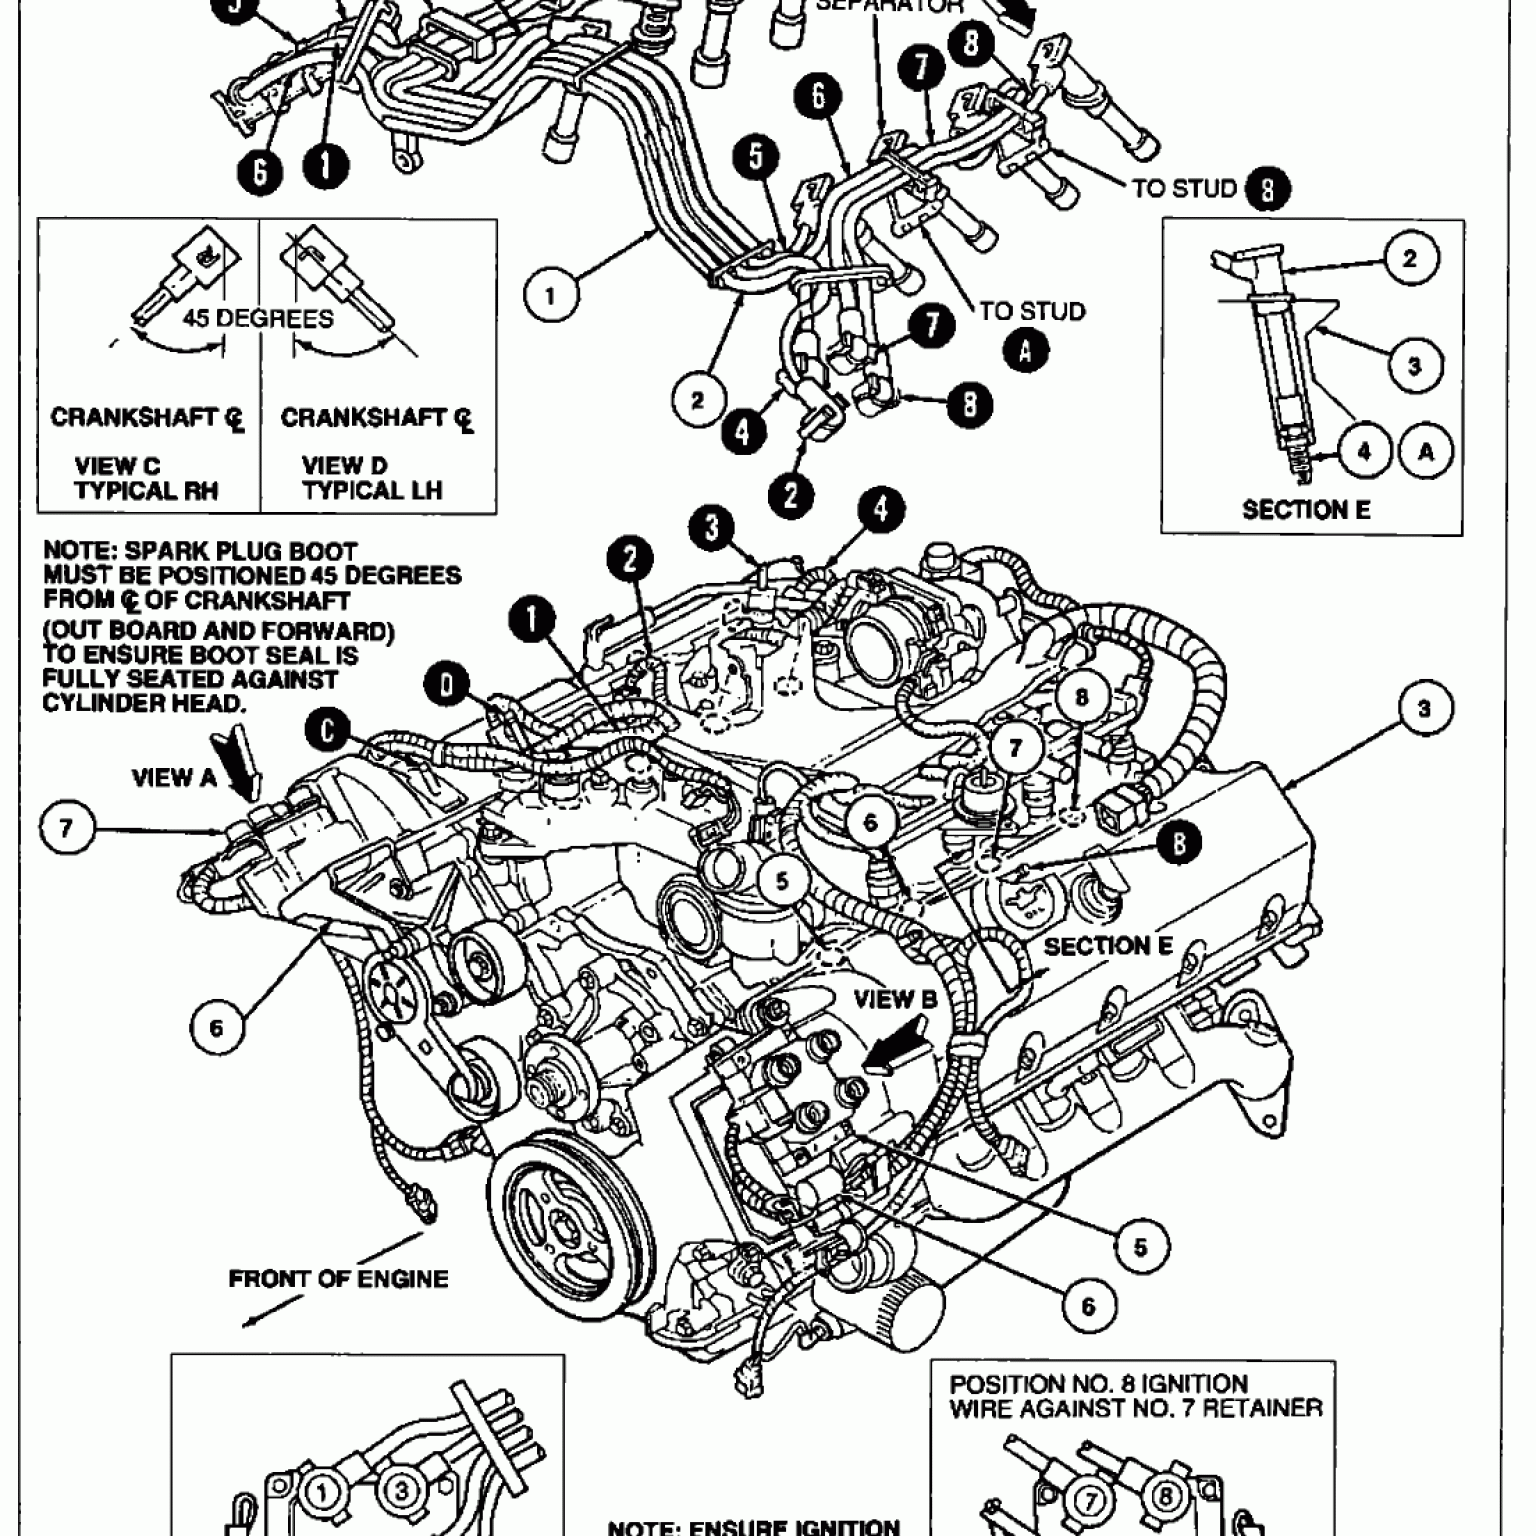 Ford 5.0L / 302 Ho And 351W Firing Order | Gtsparkplugs | Wiring and